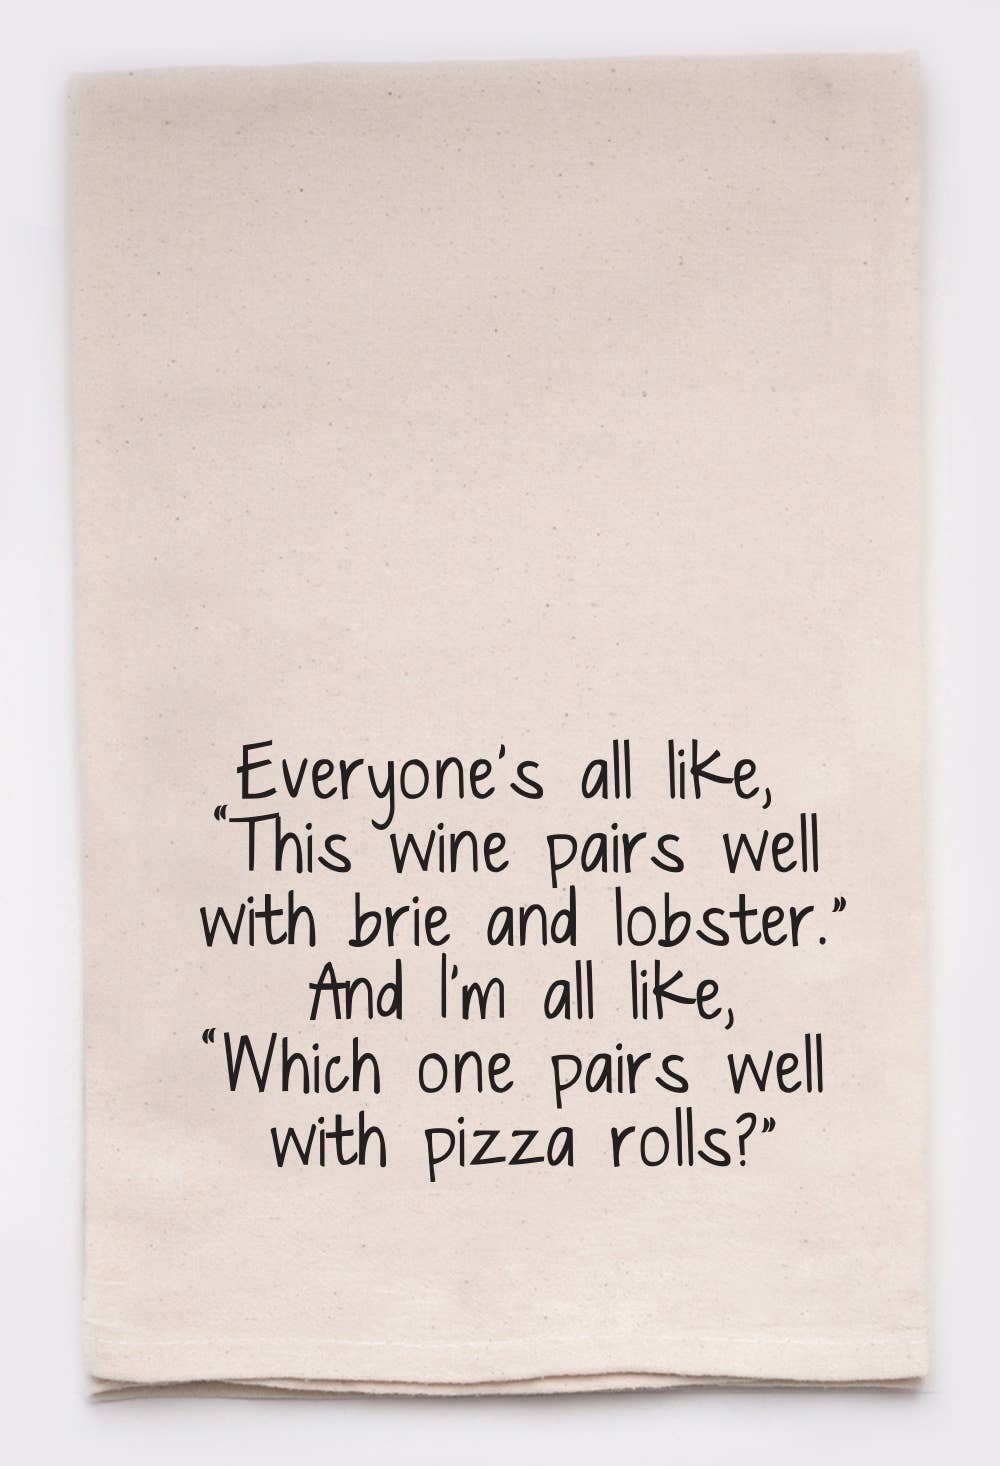 Pizza Rolls pair well with wine funny Kitchen Tea Towel